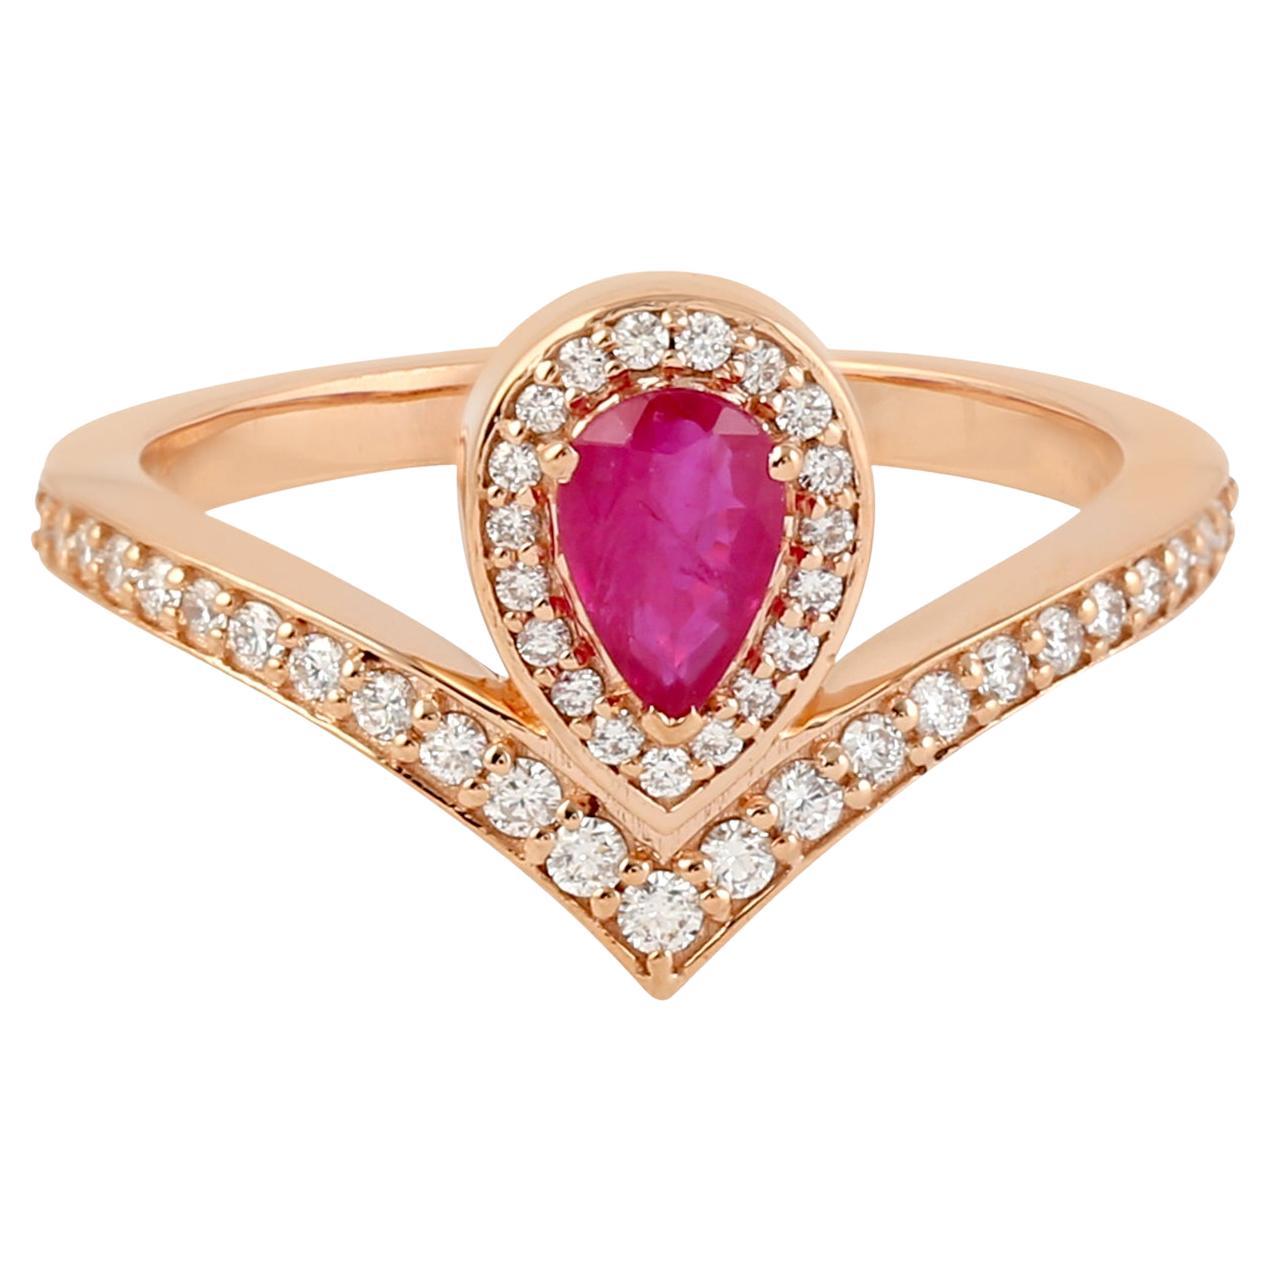 Pear Shaped Ruby Ring Accented With Diamonds Made In 18k Rose Gold For Sale